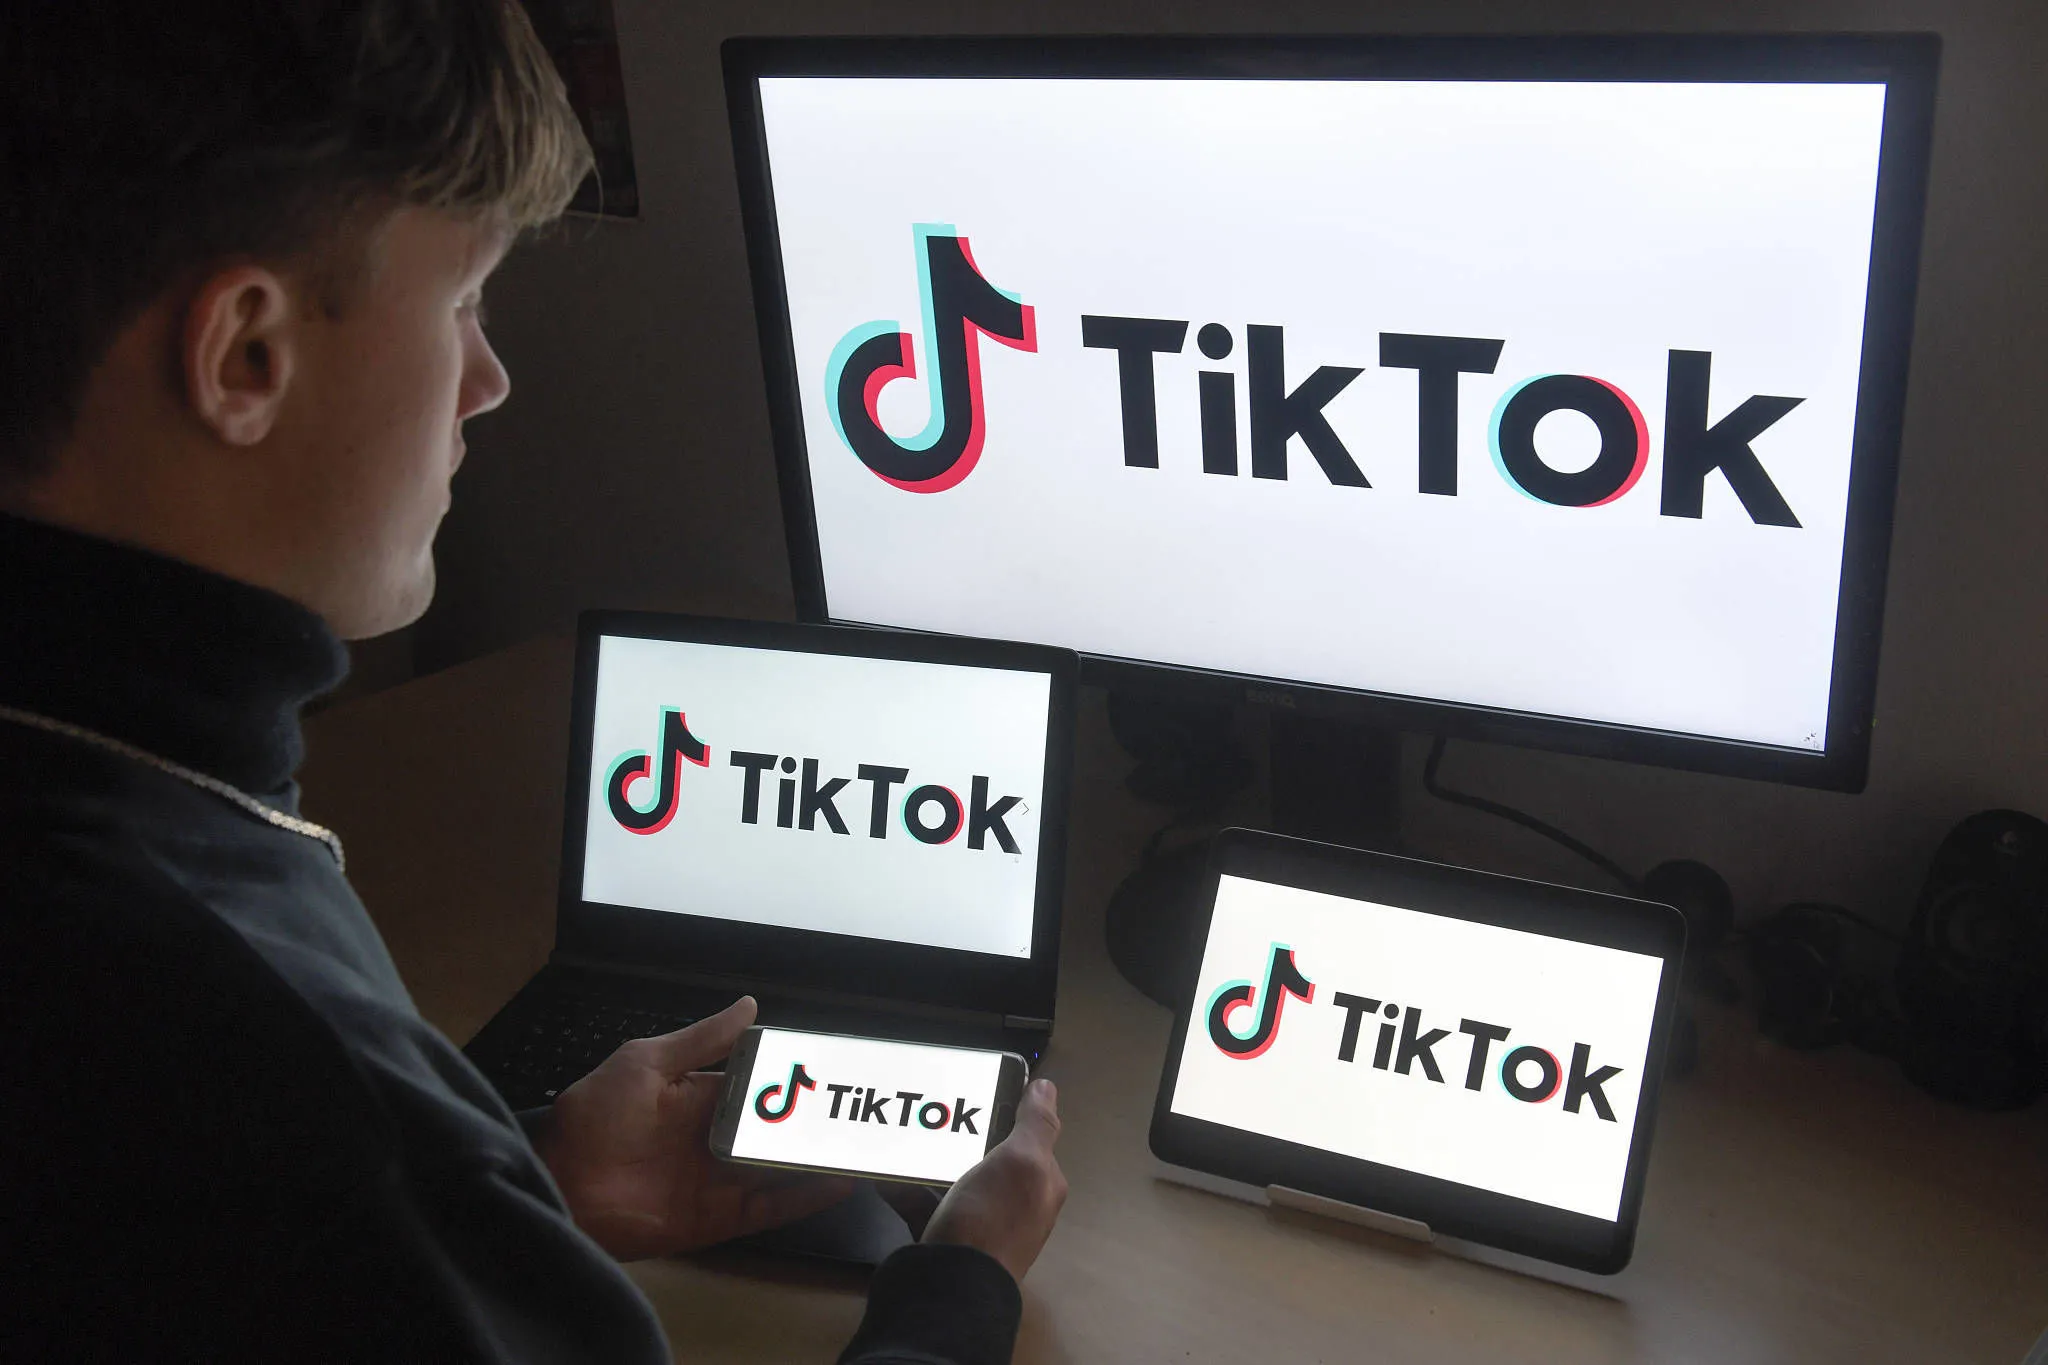 How Do I See My Reposts on TikTok: Step-by-Step Guide